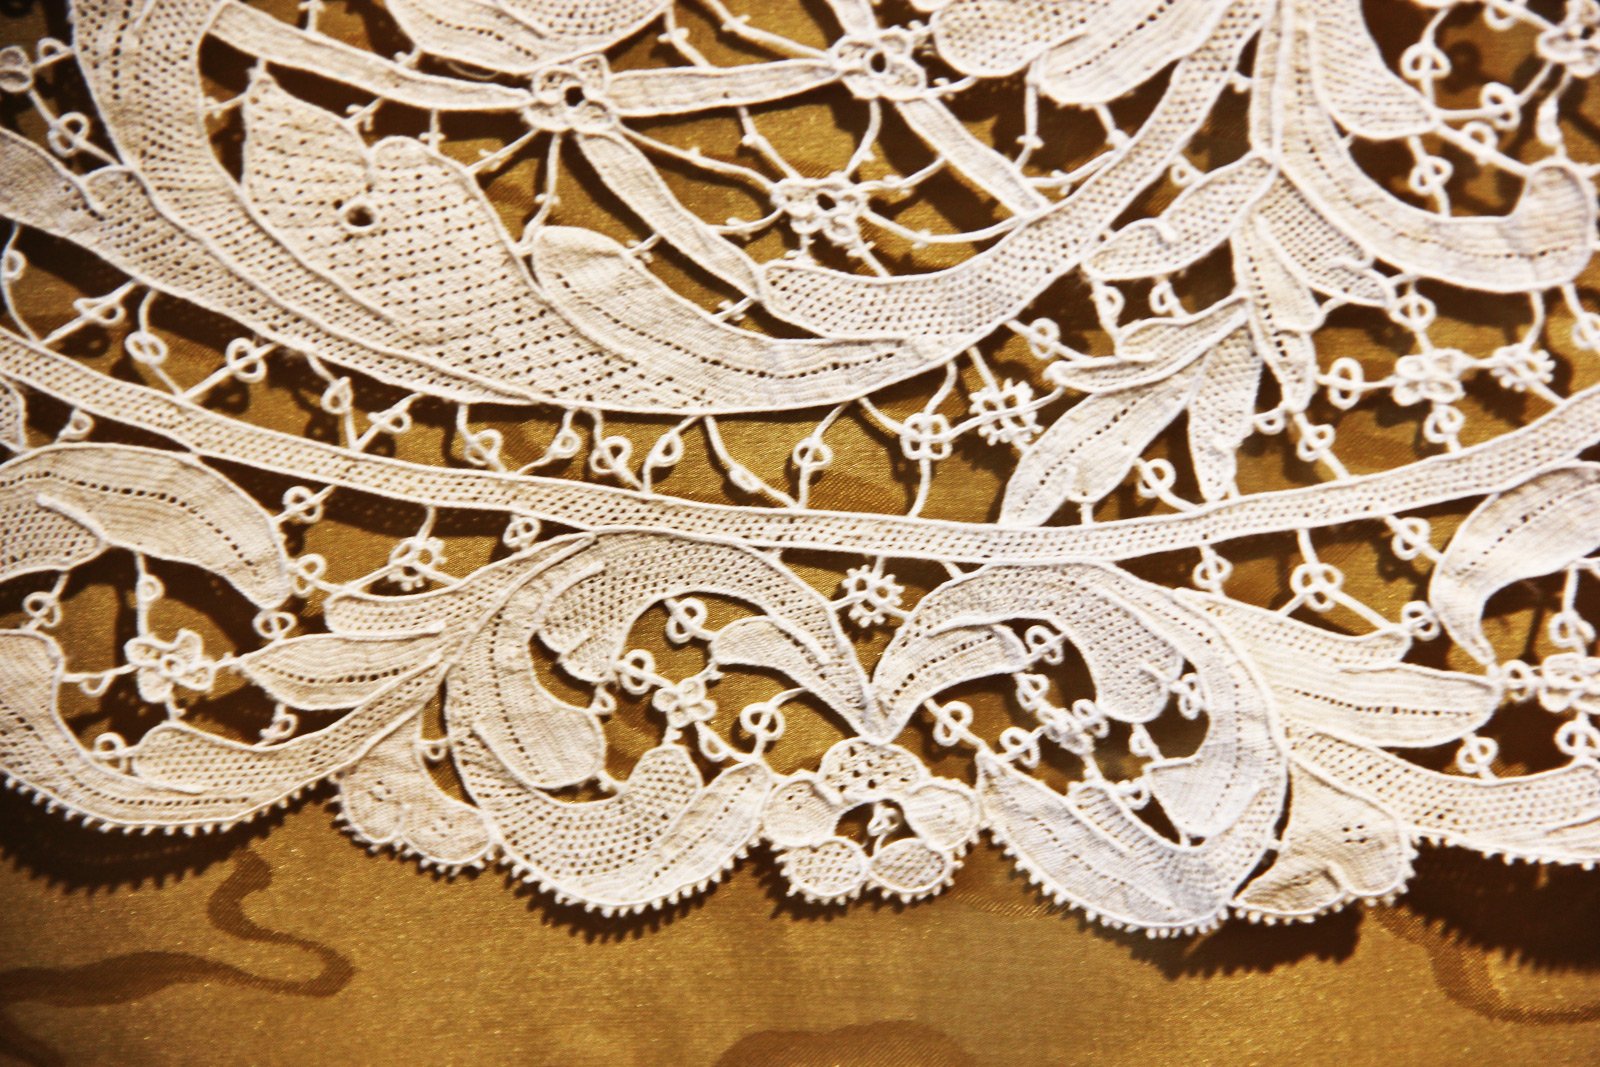 How to buy Burano lace in Venice